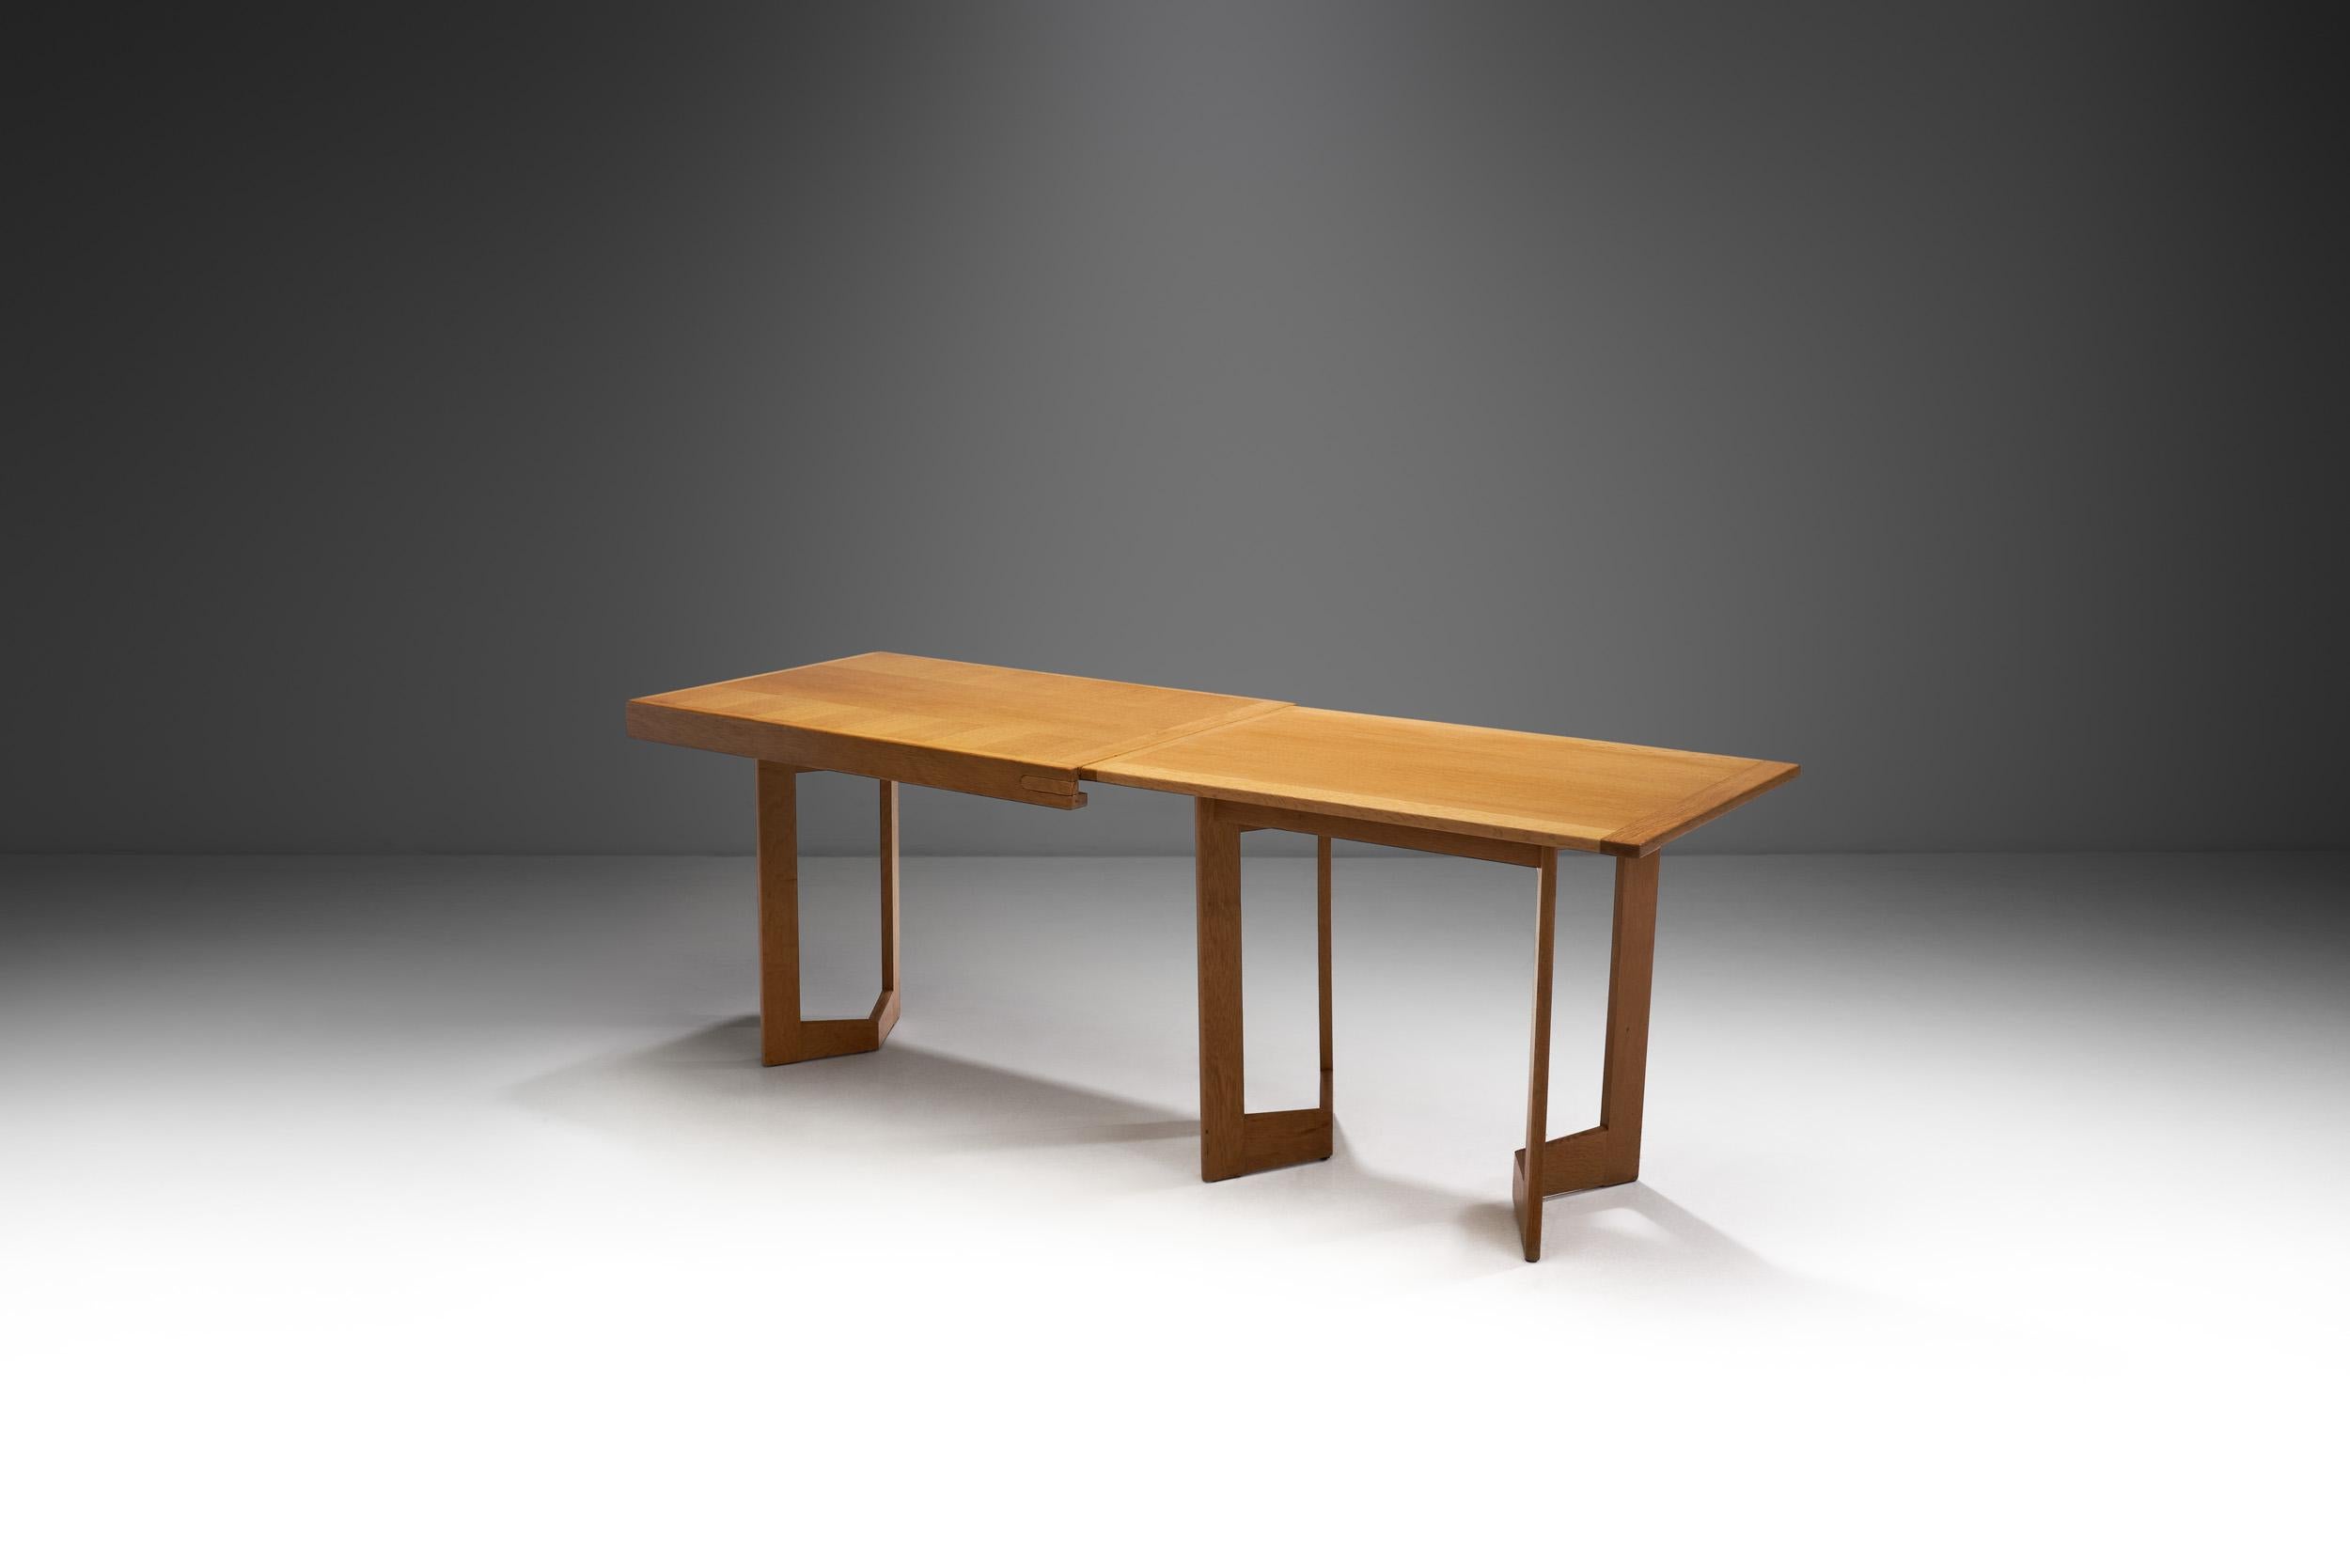 This “Fanette” extendable dining table is among the most innovative and distinctive table designs of the French designer duo, Guillerme et Chambron and their company, Votre Maison. The true genius of the duo’s present model is how the